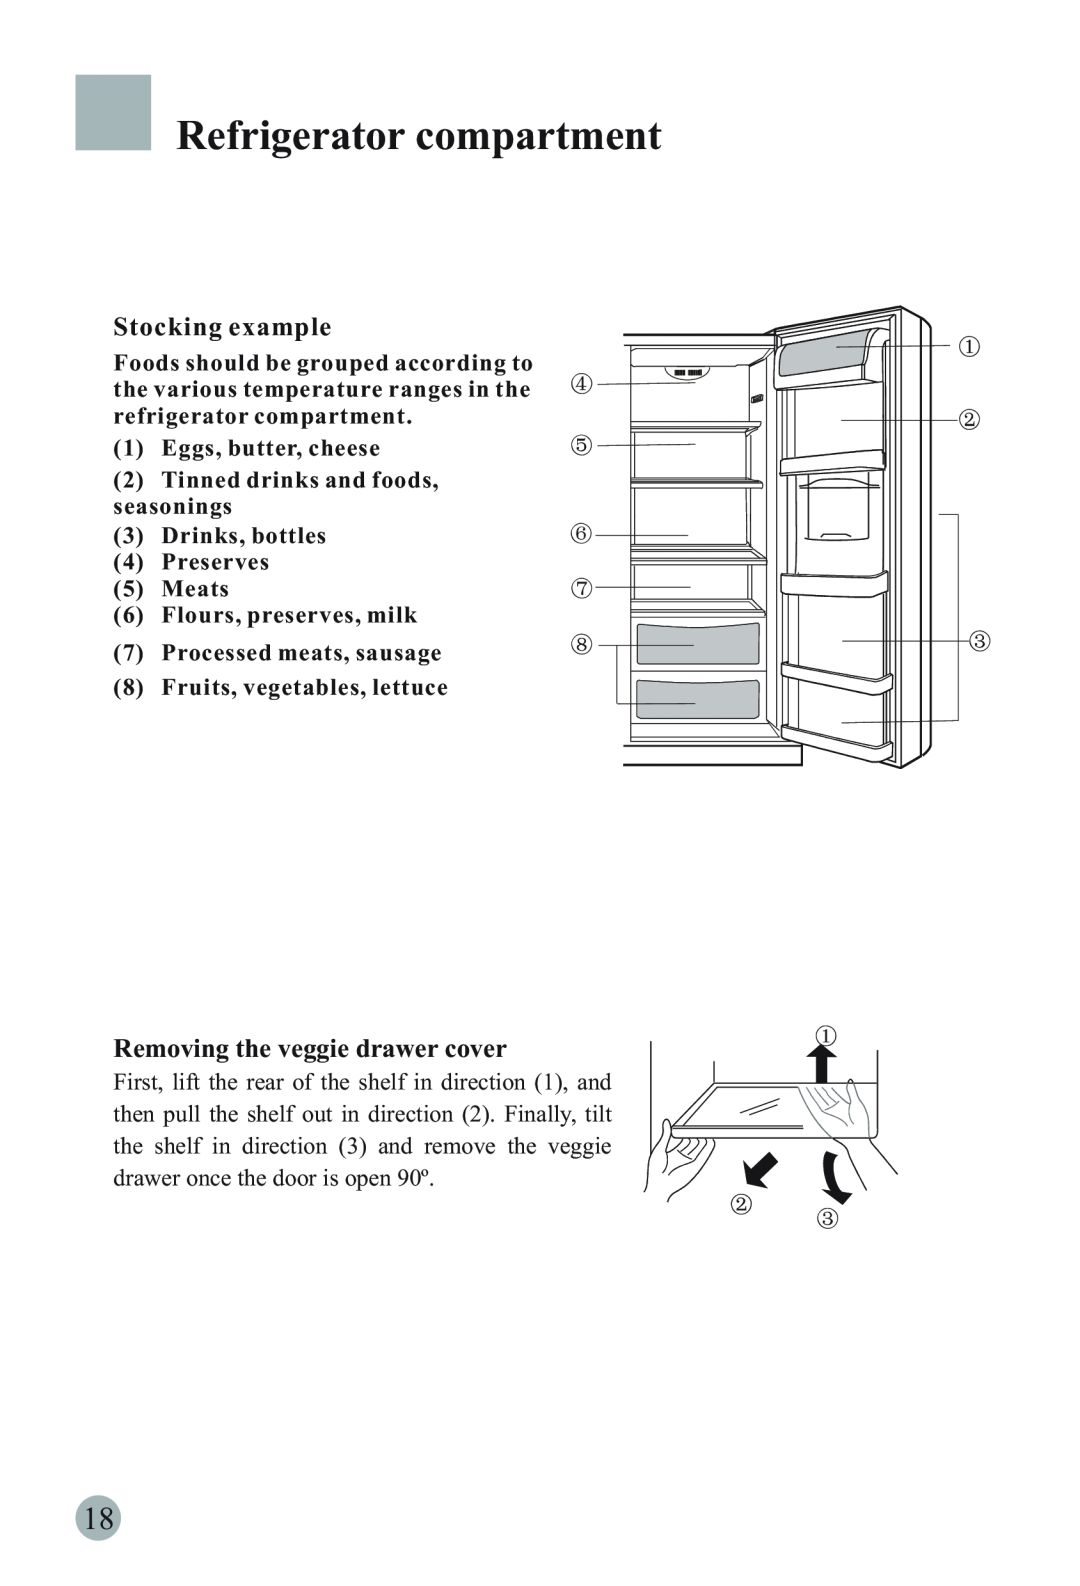 Haier HRF-66ISA2, HRF-66ITA2, HRF-66ATA2 manual Stocking example, Removing the veggie drawer cover, Refrigerator compartment 